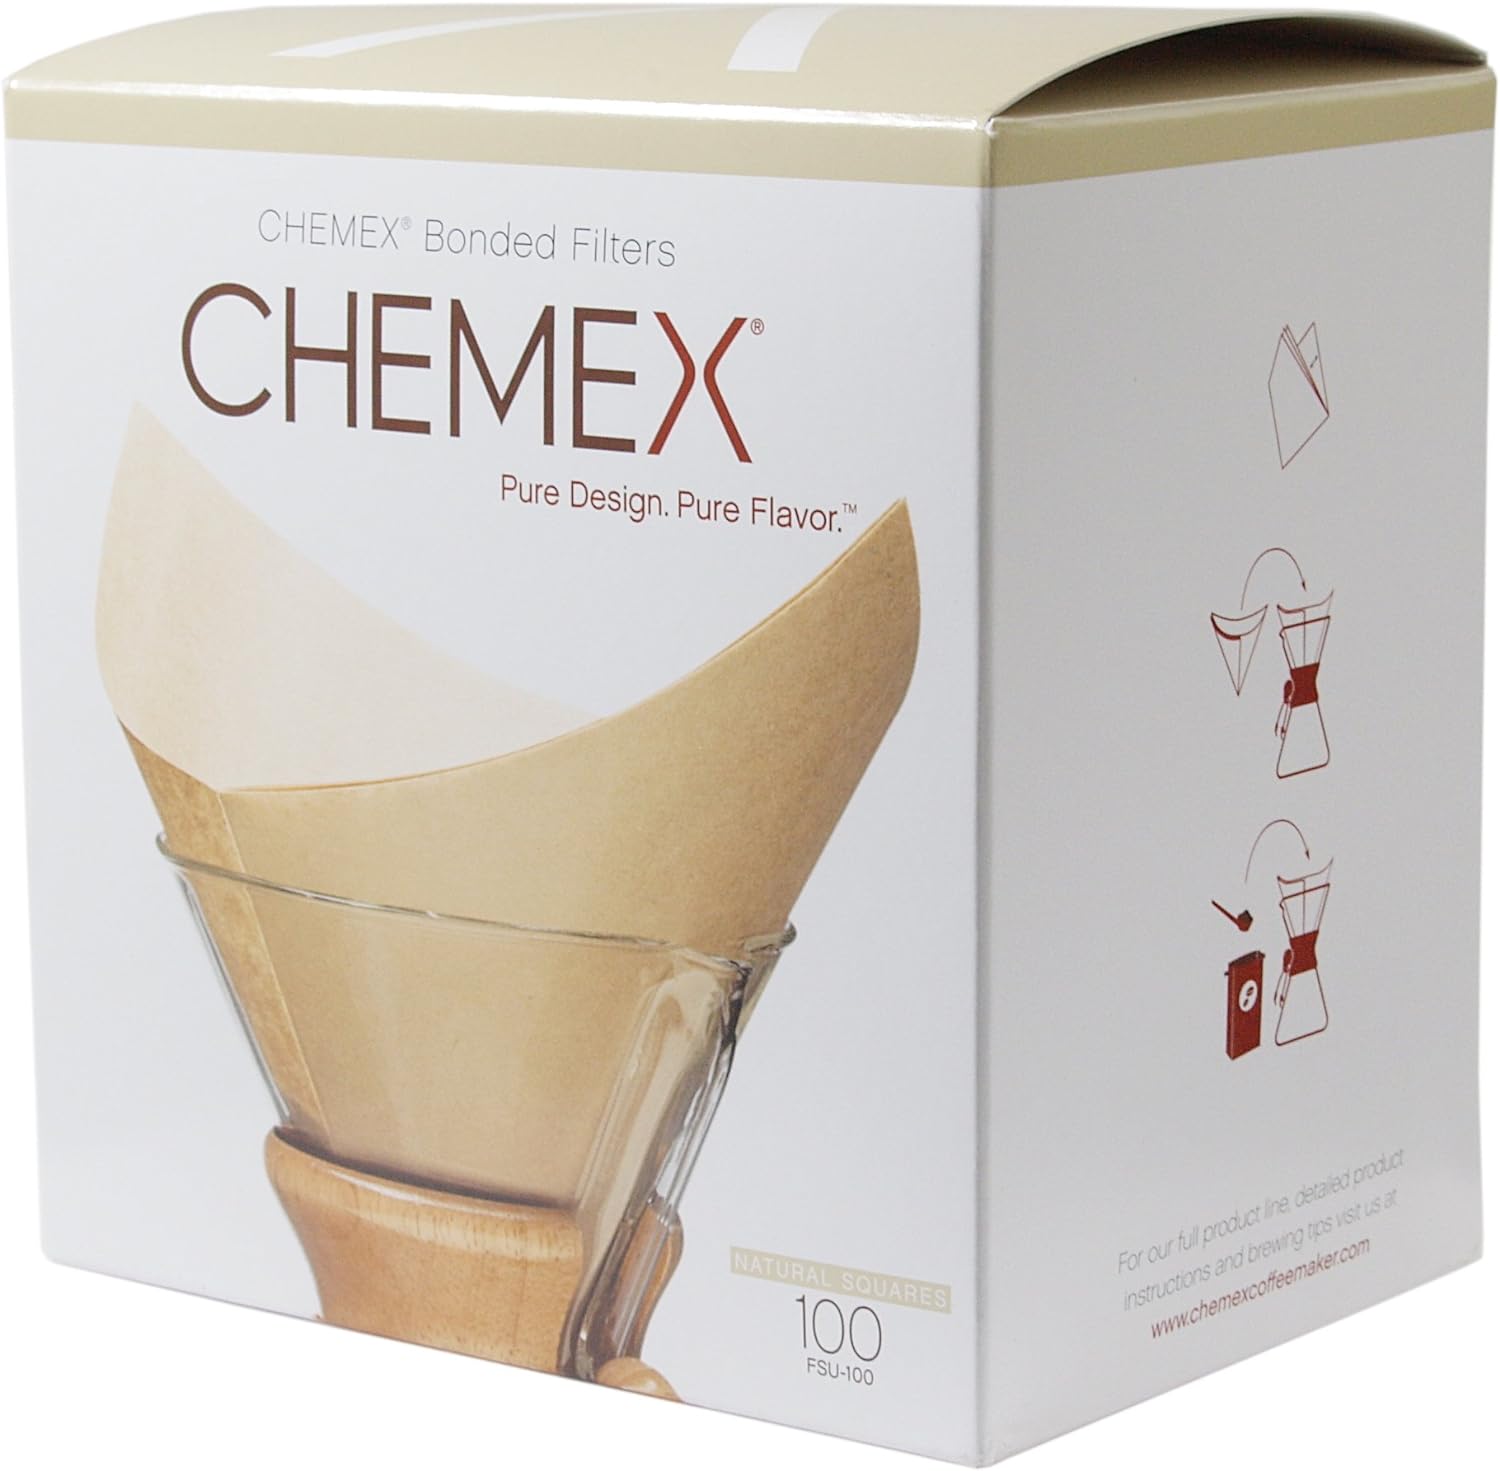 Chemex Bonded Pre-folded Unbleached Square Coffee Filters, Set of 200